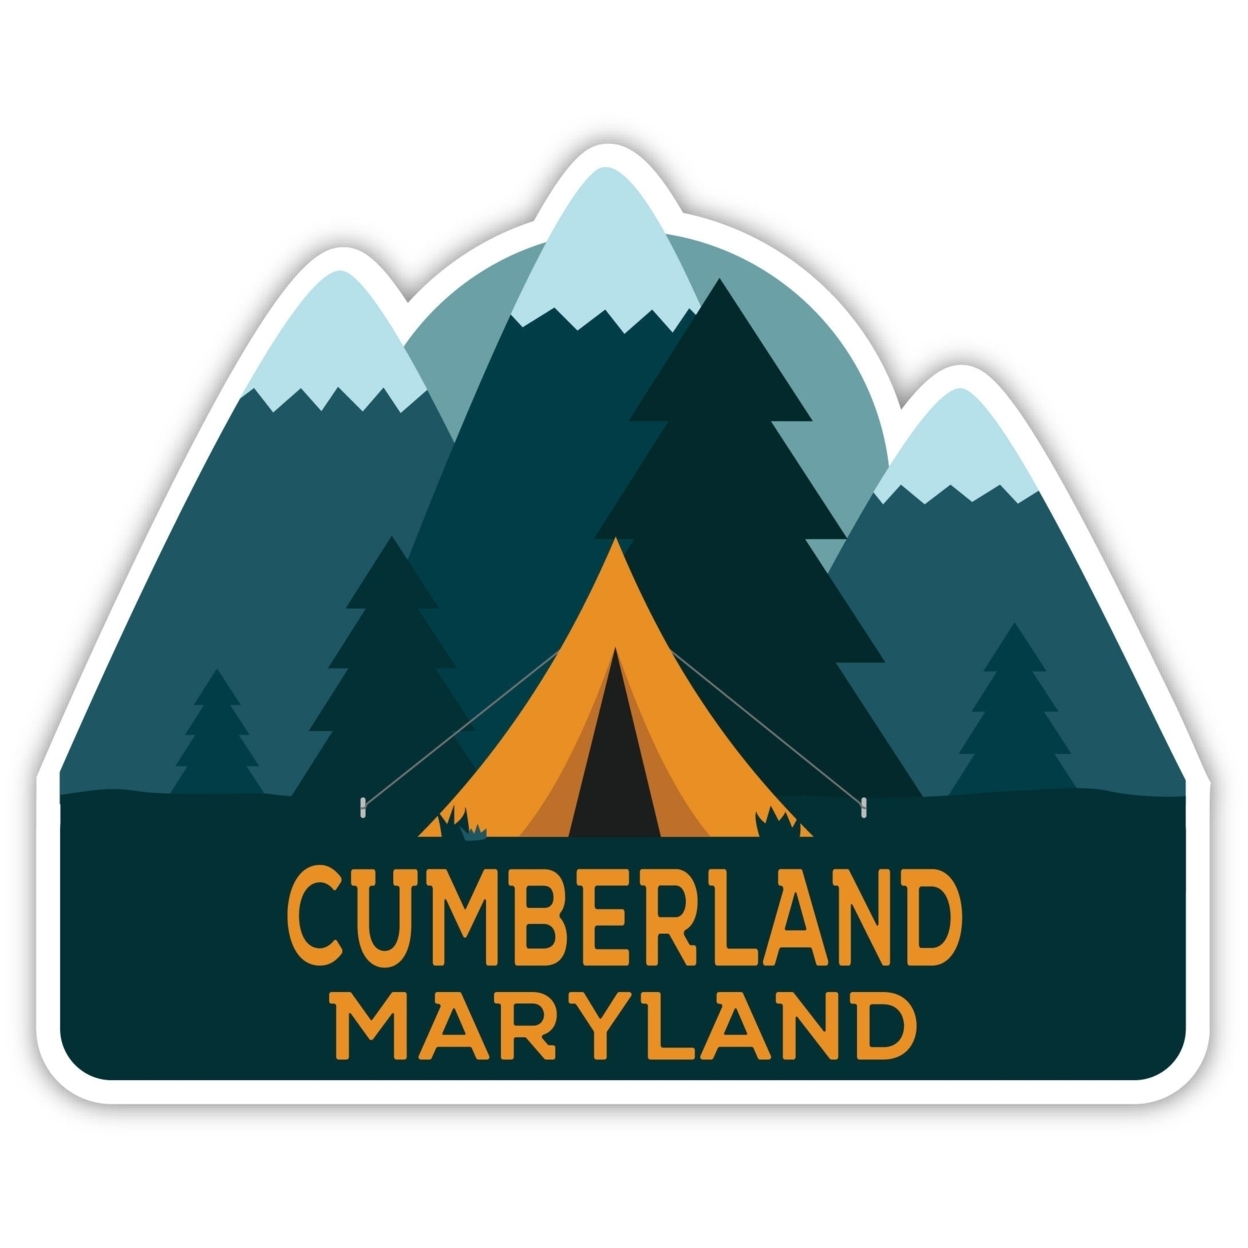 Cumberland Maryland Souvenir Decorative Stickers (Choose Theme And Size) - Single Unit, 10-Inch, Tent